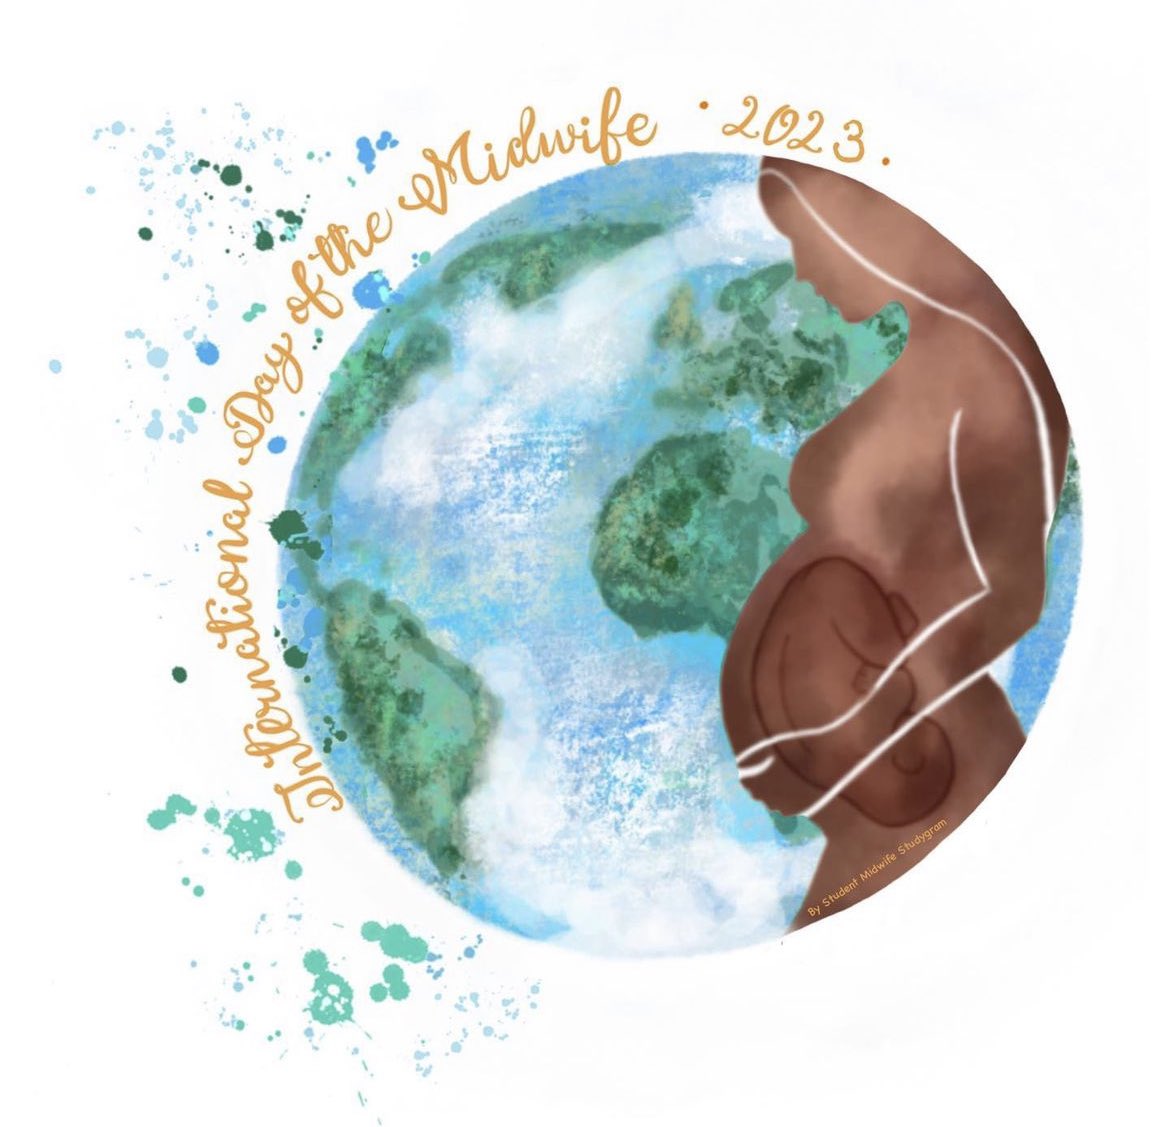 ✨ Happy International Day of the Midwife 2023 - we stand with you and we love you! ✨

#idm #midwife #midwifery #maternity #studentmidwife #studentmidwifelife #midwifery #midwives #midwivesrock #midwifelife #thankyou